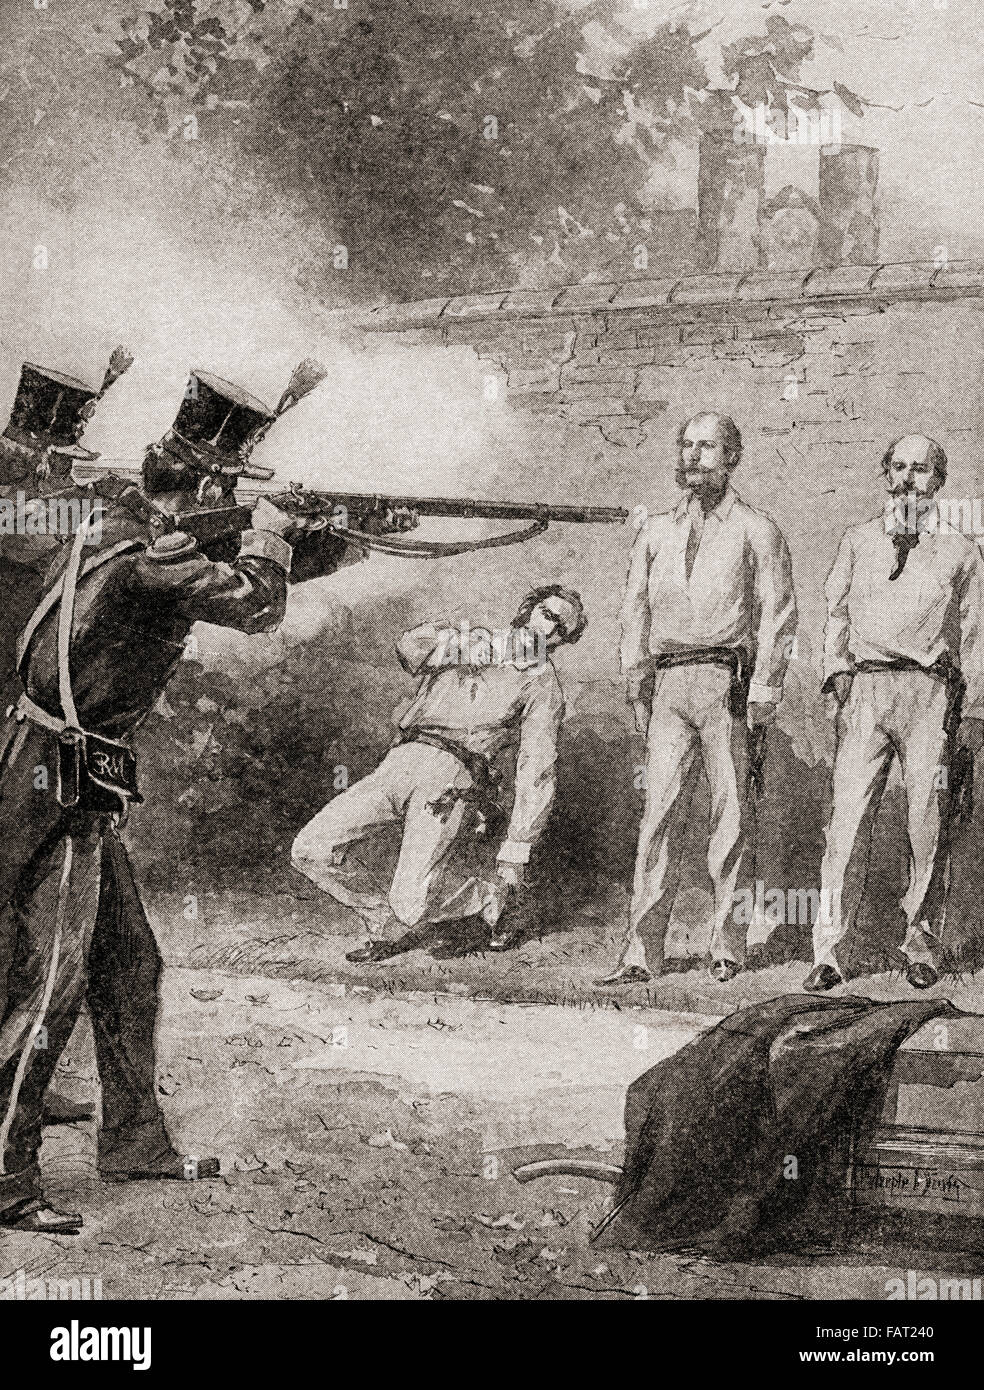 The execution, by firing squad, of Maximilian I in 1867.  Maximilian I, born Ferdinand Maximilian Joseph, 1832 –  1867.  Only monarch of the Second Mexican Empire.  From The History of our Country, published1900. Stock Photo